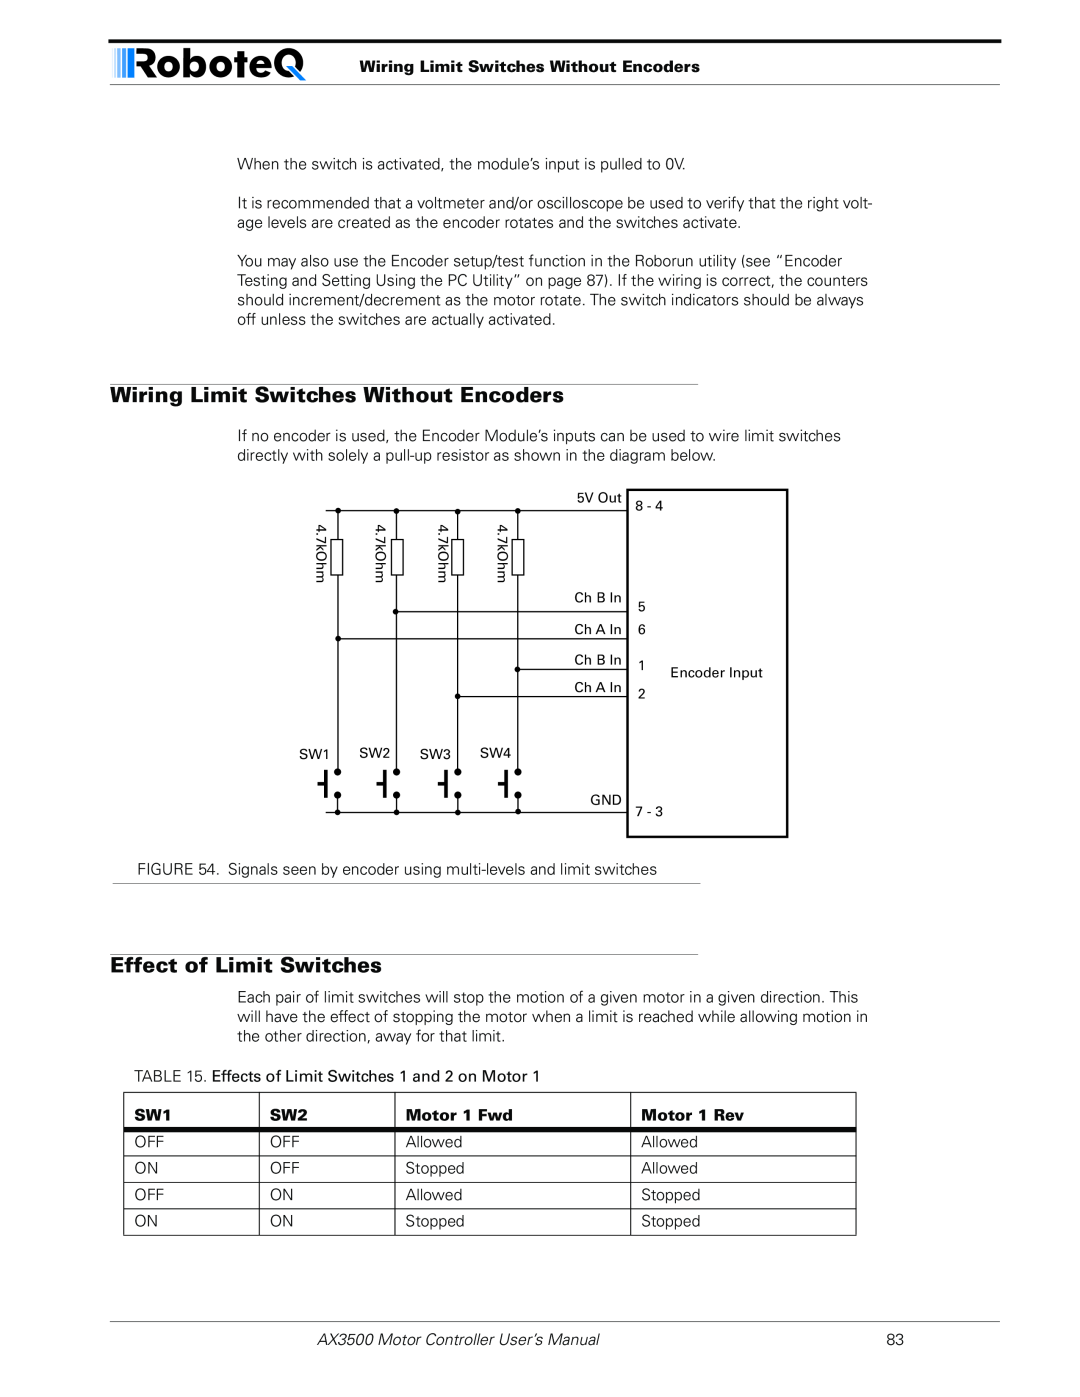 RoboteQ AX3500 user manual Wiring Limit Switches Without Encoders, Effect of Limit Switches, Motor 1 Fwd, Motor 1 Rev 